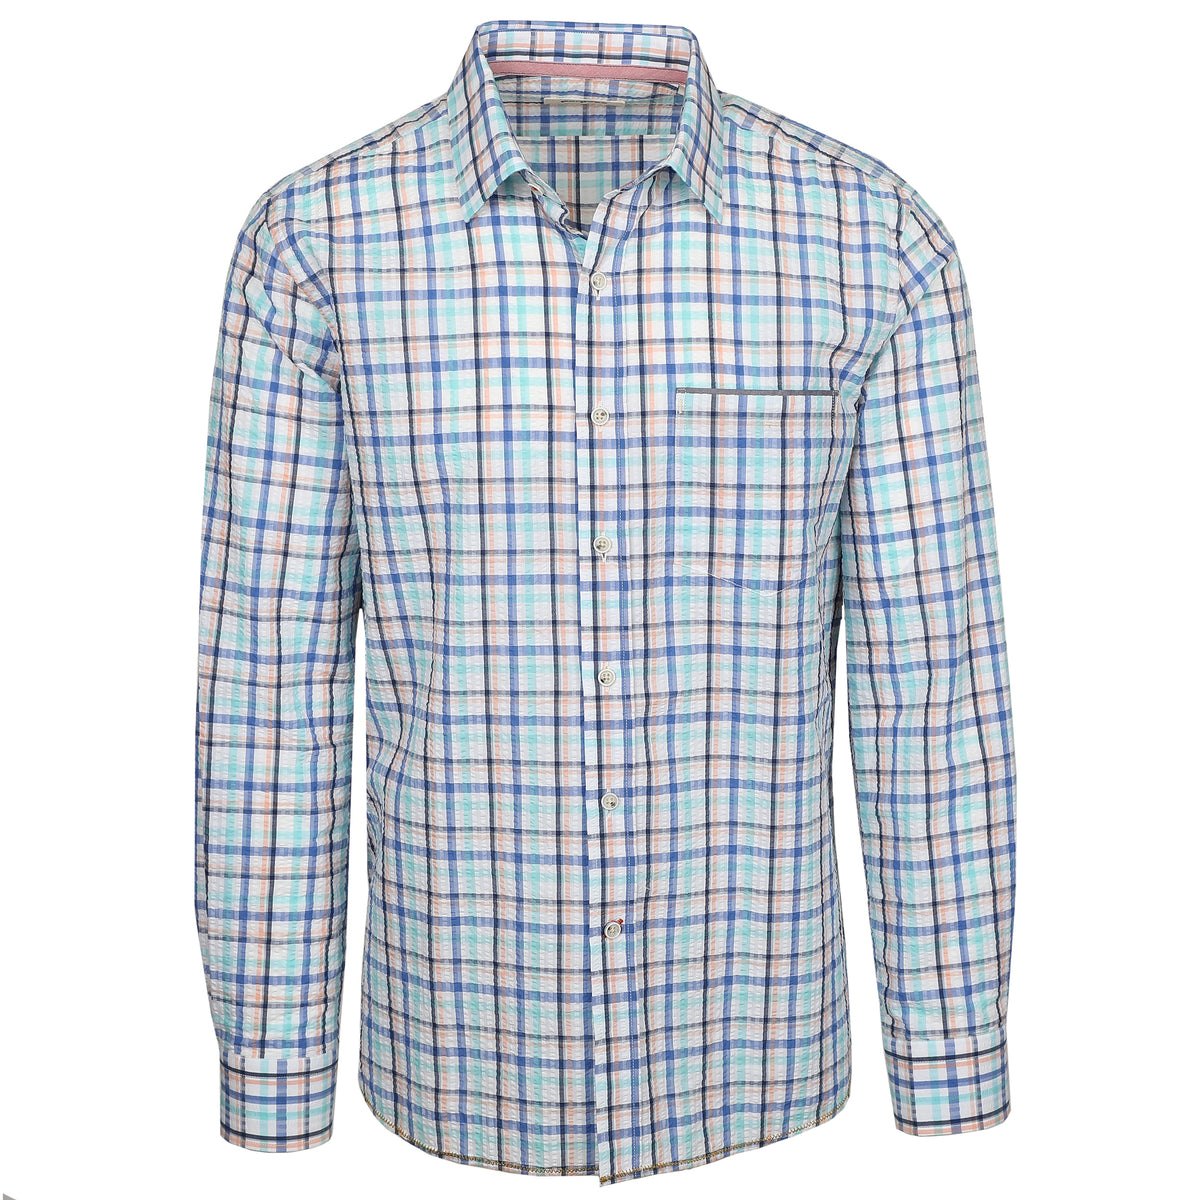 Look oh-so-cool and stay feeling hot with this Naples Royal Blue &amp; Teal Long Sleeve Check Seersucker Shirt. Crafted from lightweight seersucker fabric that&#39;s craft fully dyed for a unique look, you&#39;ll be ready for warm weather, whatever the season. Pucker up for a style that&#39;ll have onlookers in awe.